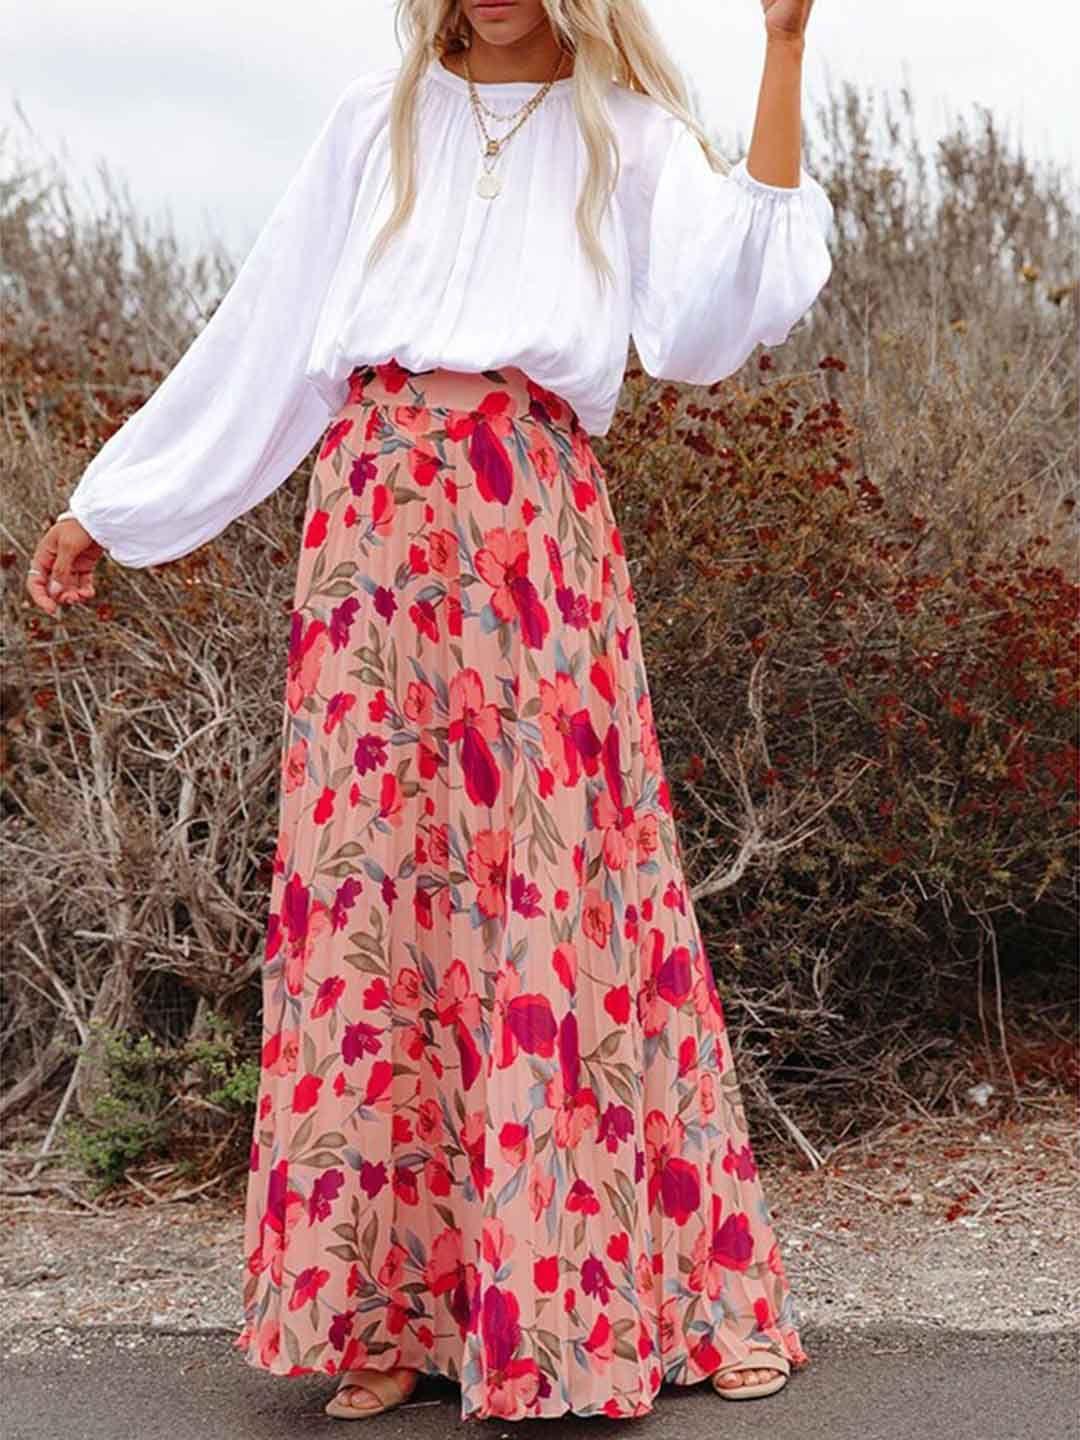 stylecast pink printed a-line maxi skirt